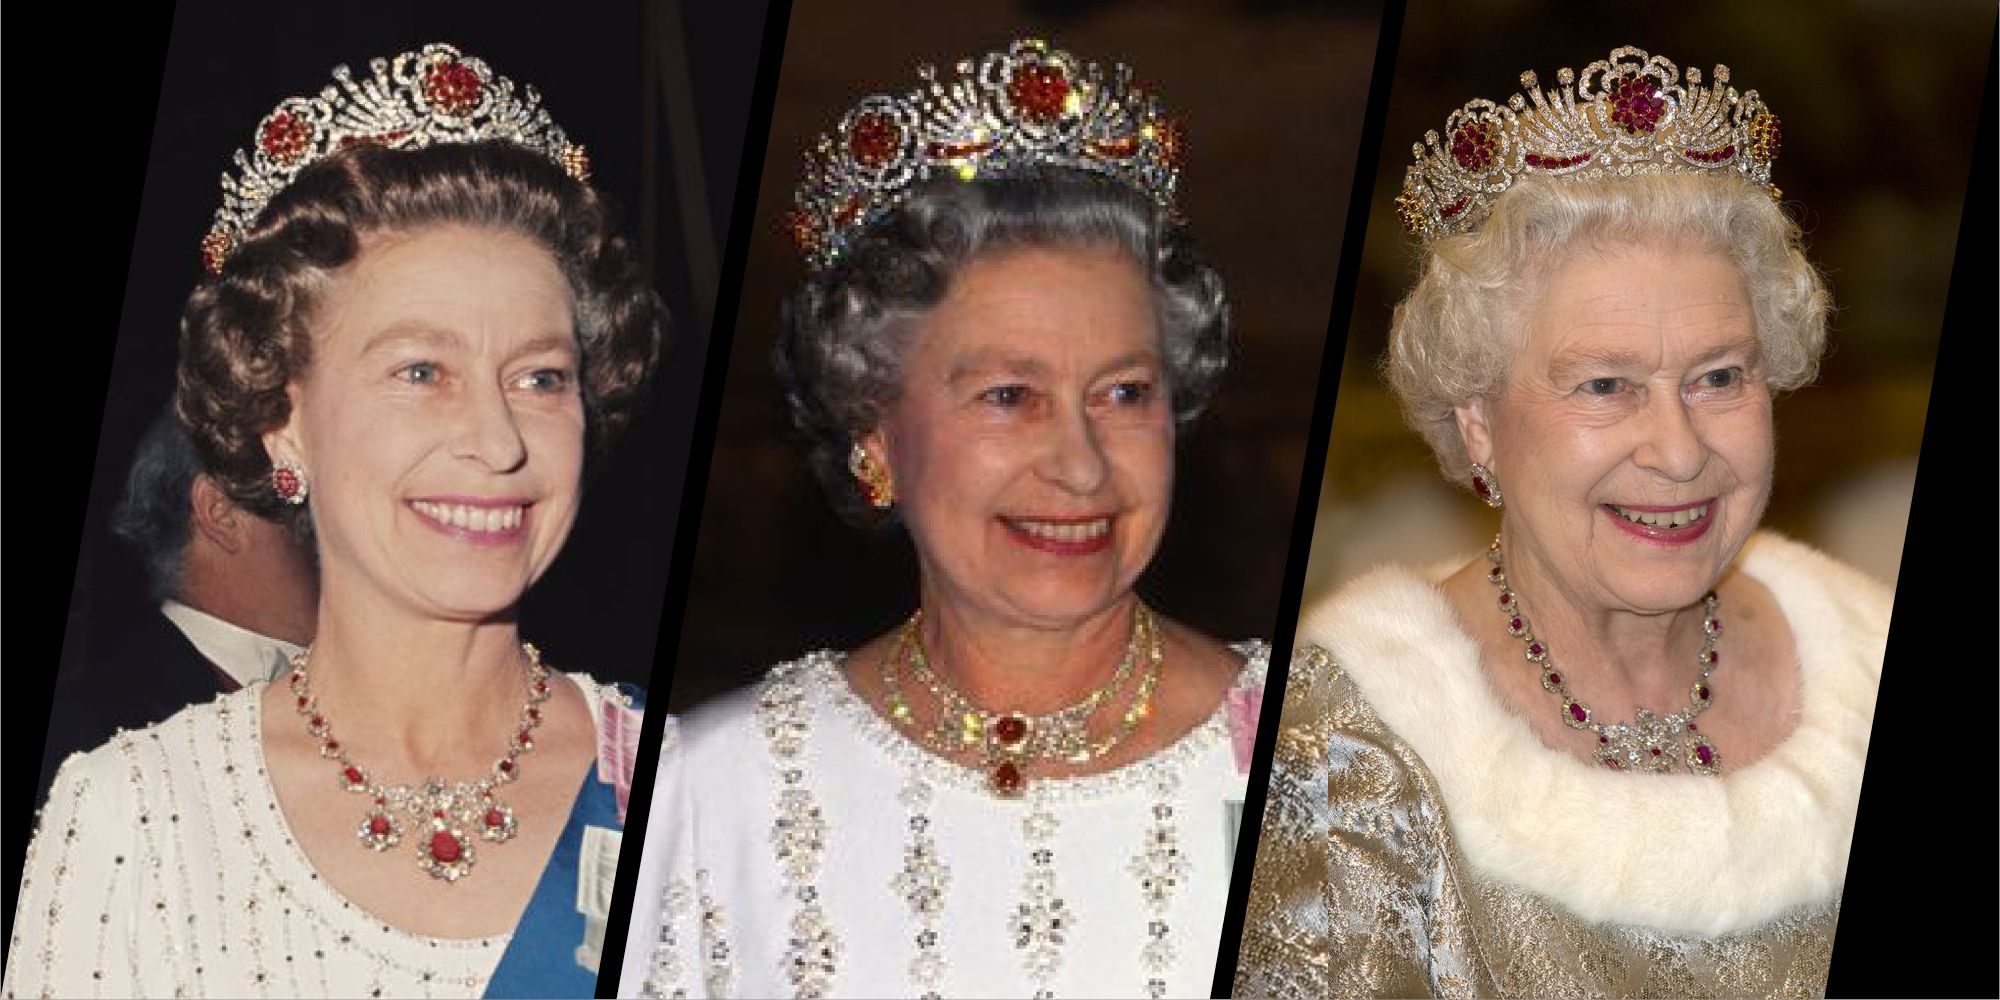 The story behind the Queens iconic hair style